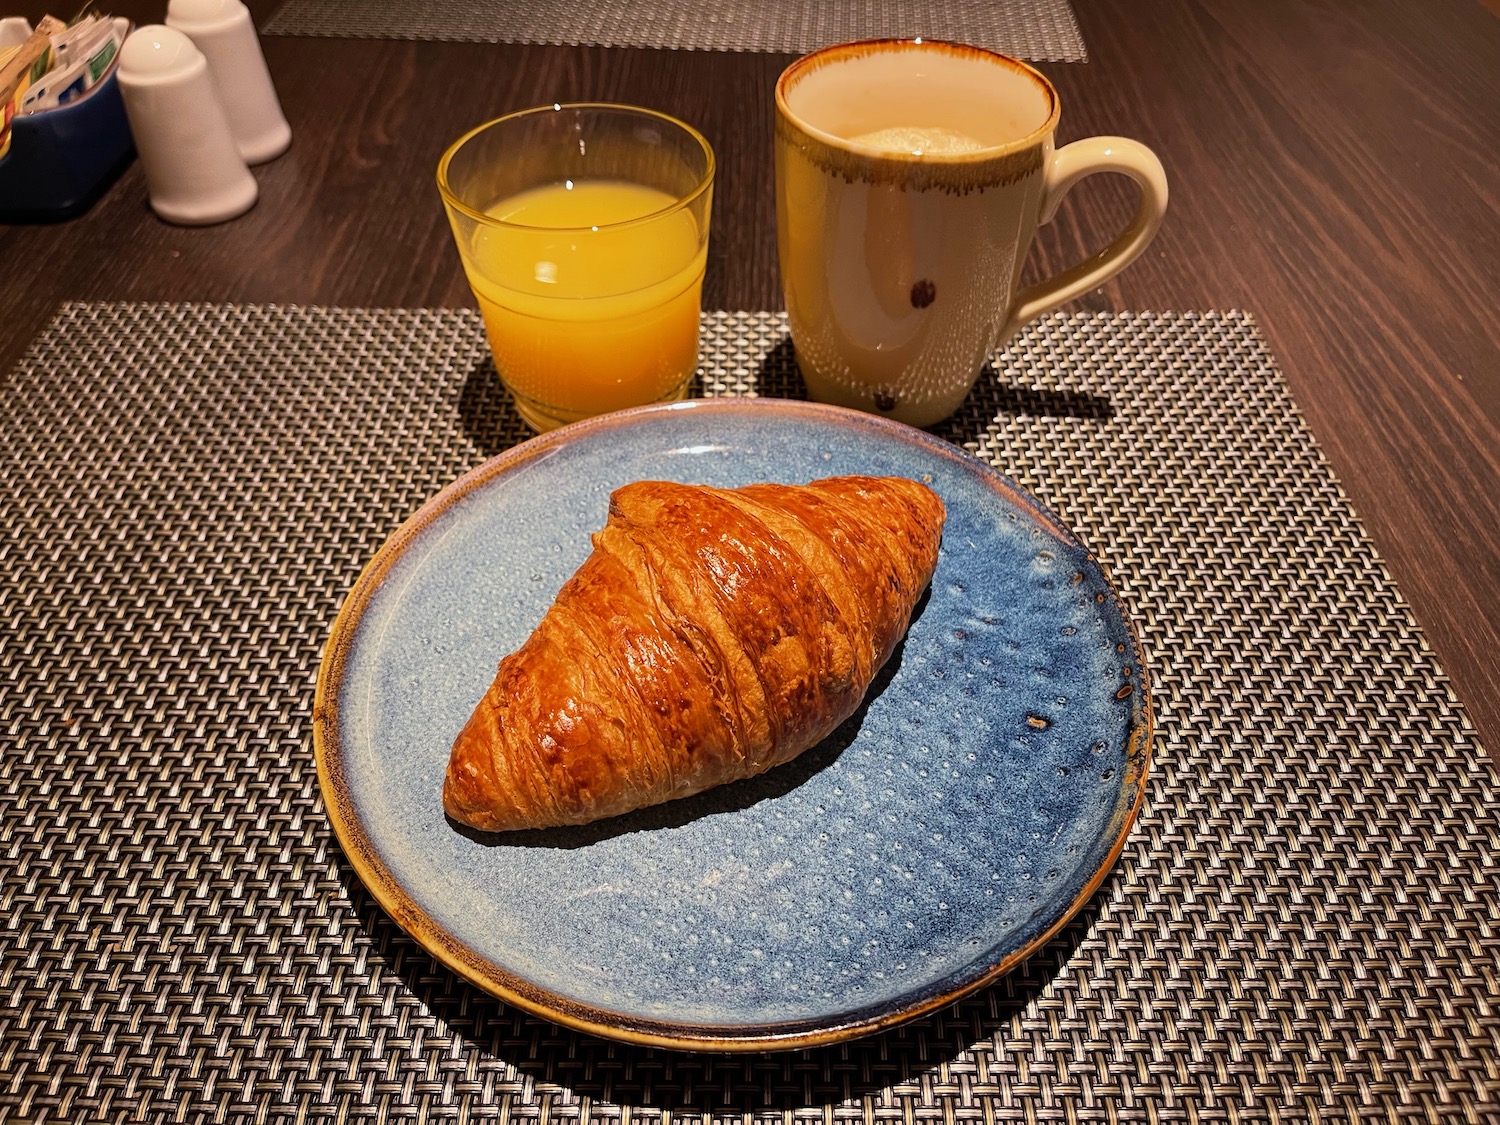 a croissant on a plate next to a mug of juice